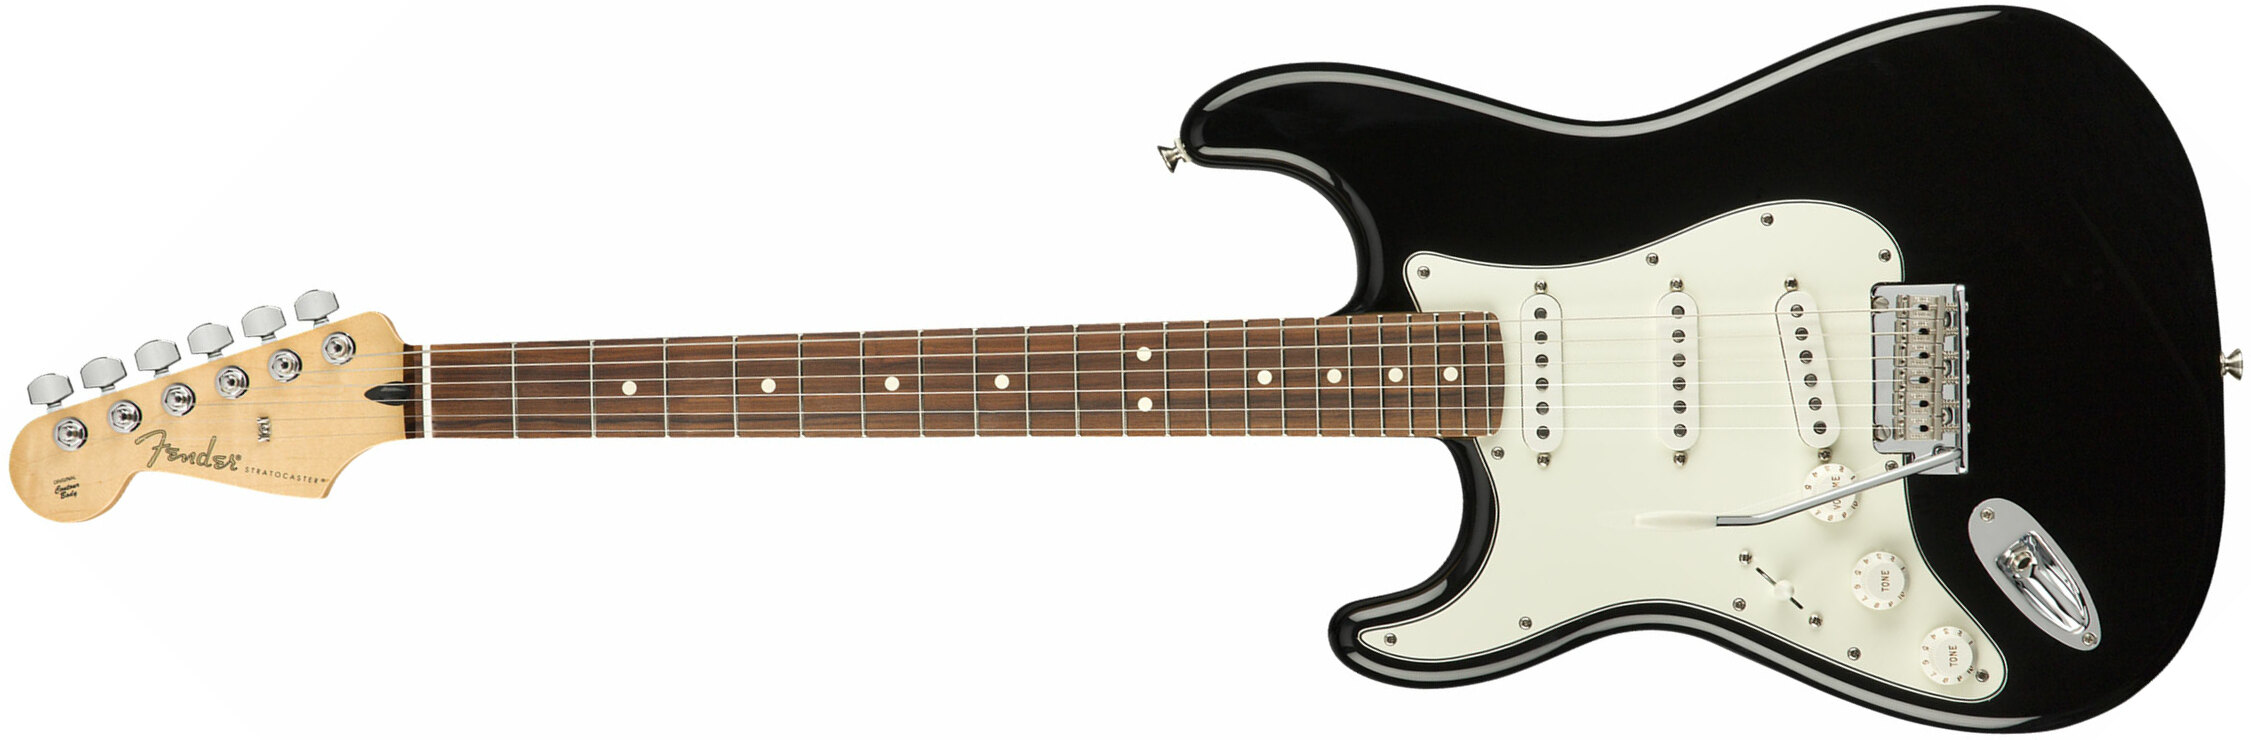 Fender Strat Player Lh Gaucher Mex Sss Pf - Black - Left-handed electric guitar - Main picture